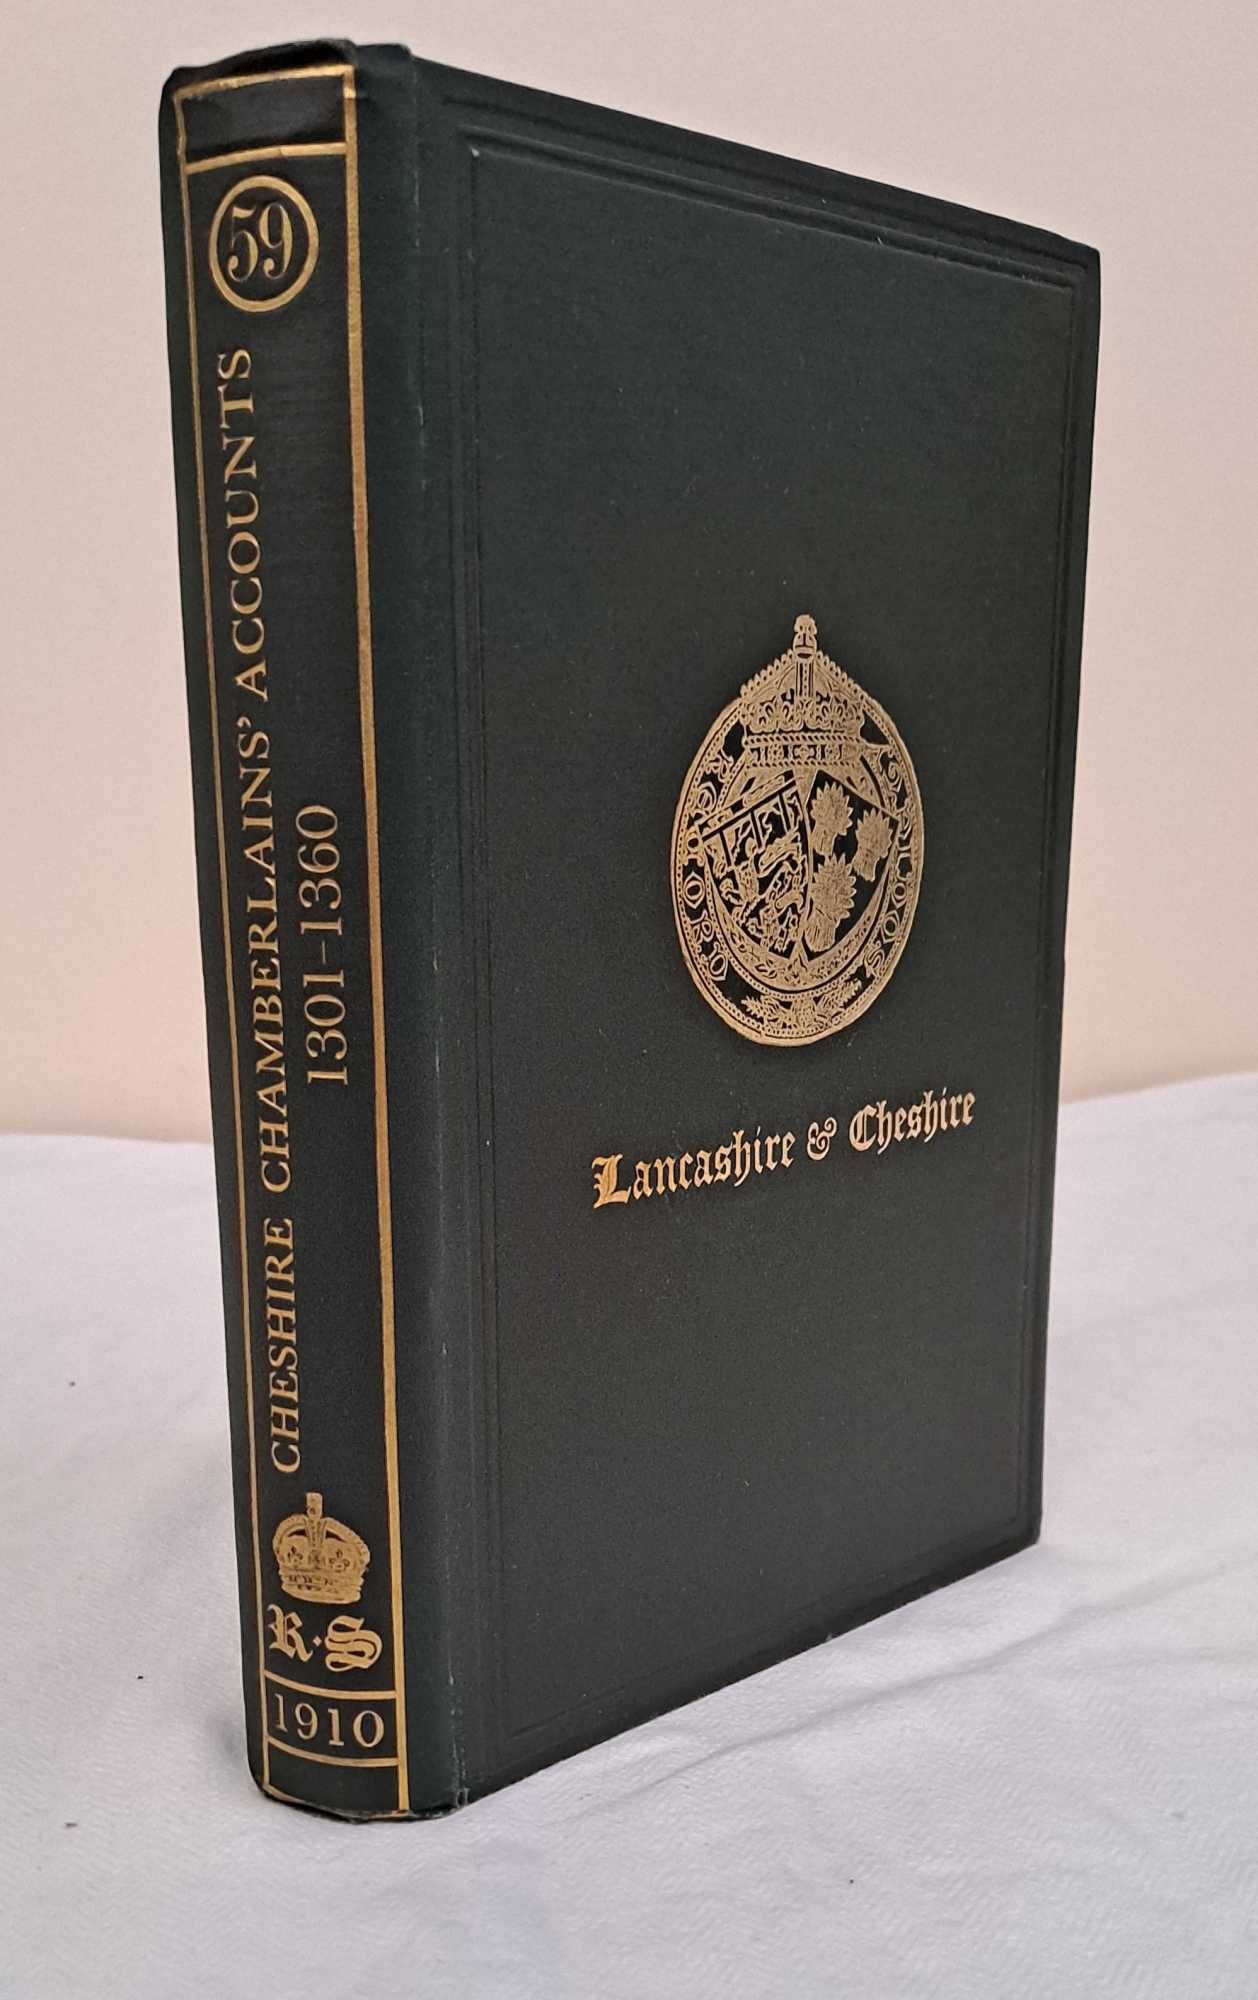 Edited with an introduction by Ronald Stewart-Brown - Accounts of The Chamberlains and Other Officers of the County of Chester from the Original Rolls preserved in the Public Record Office, London. Record Society for Publication of Original Documents relating to Lancashire & Cheshire Vol. LIX